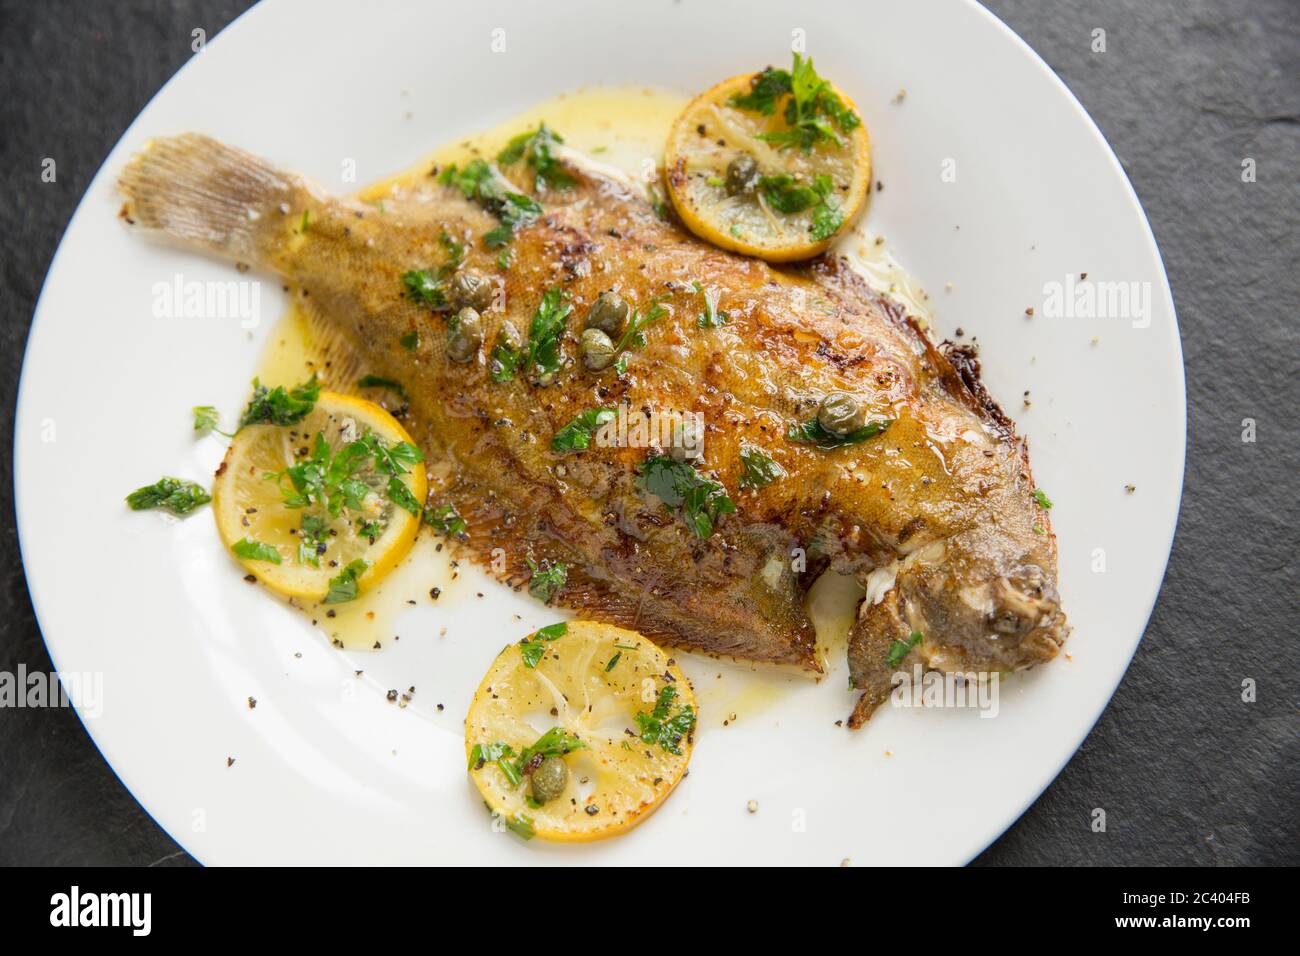 A home cooked whole lemon sole, Microstomus kitt, that has been pan fried in butter with lemon slices, capers and parsley. Presented on a white plate Stock Photo